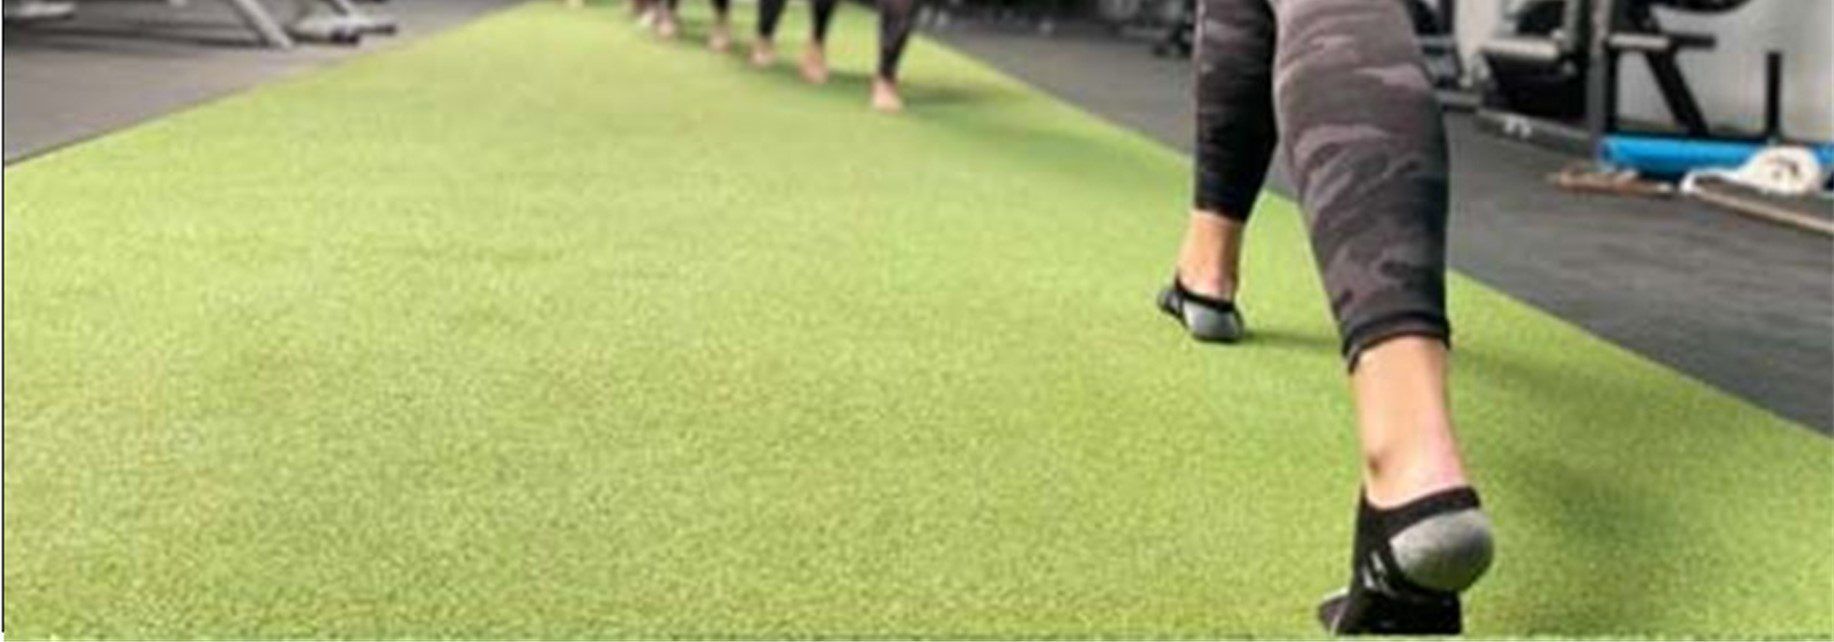 Playground Artificial Grass Landscapes for schools, backyards, Riverside